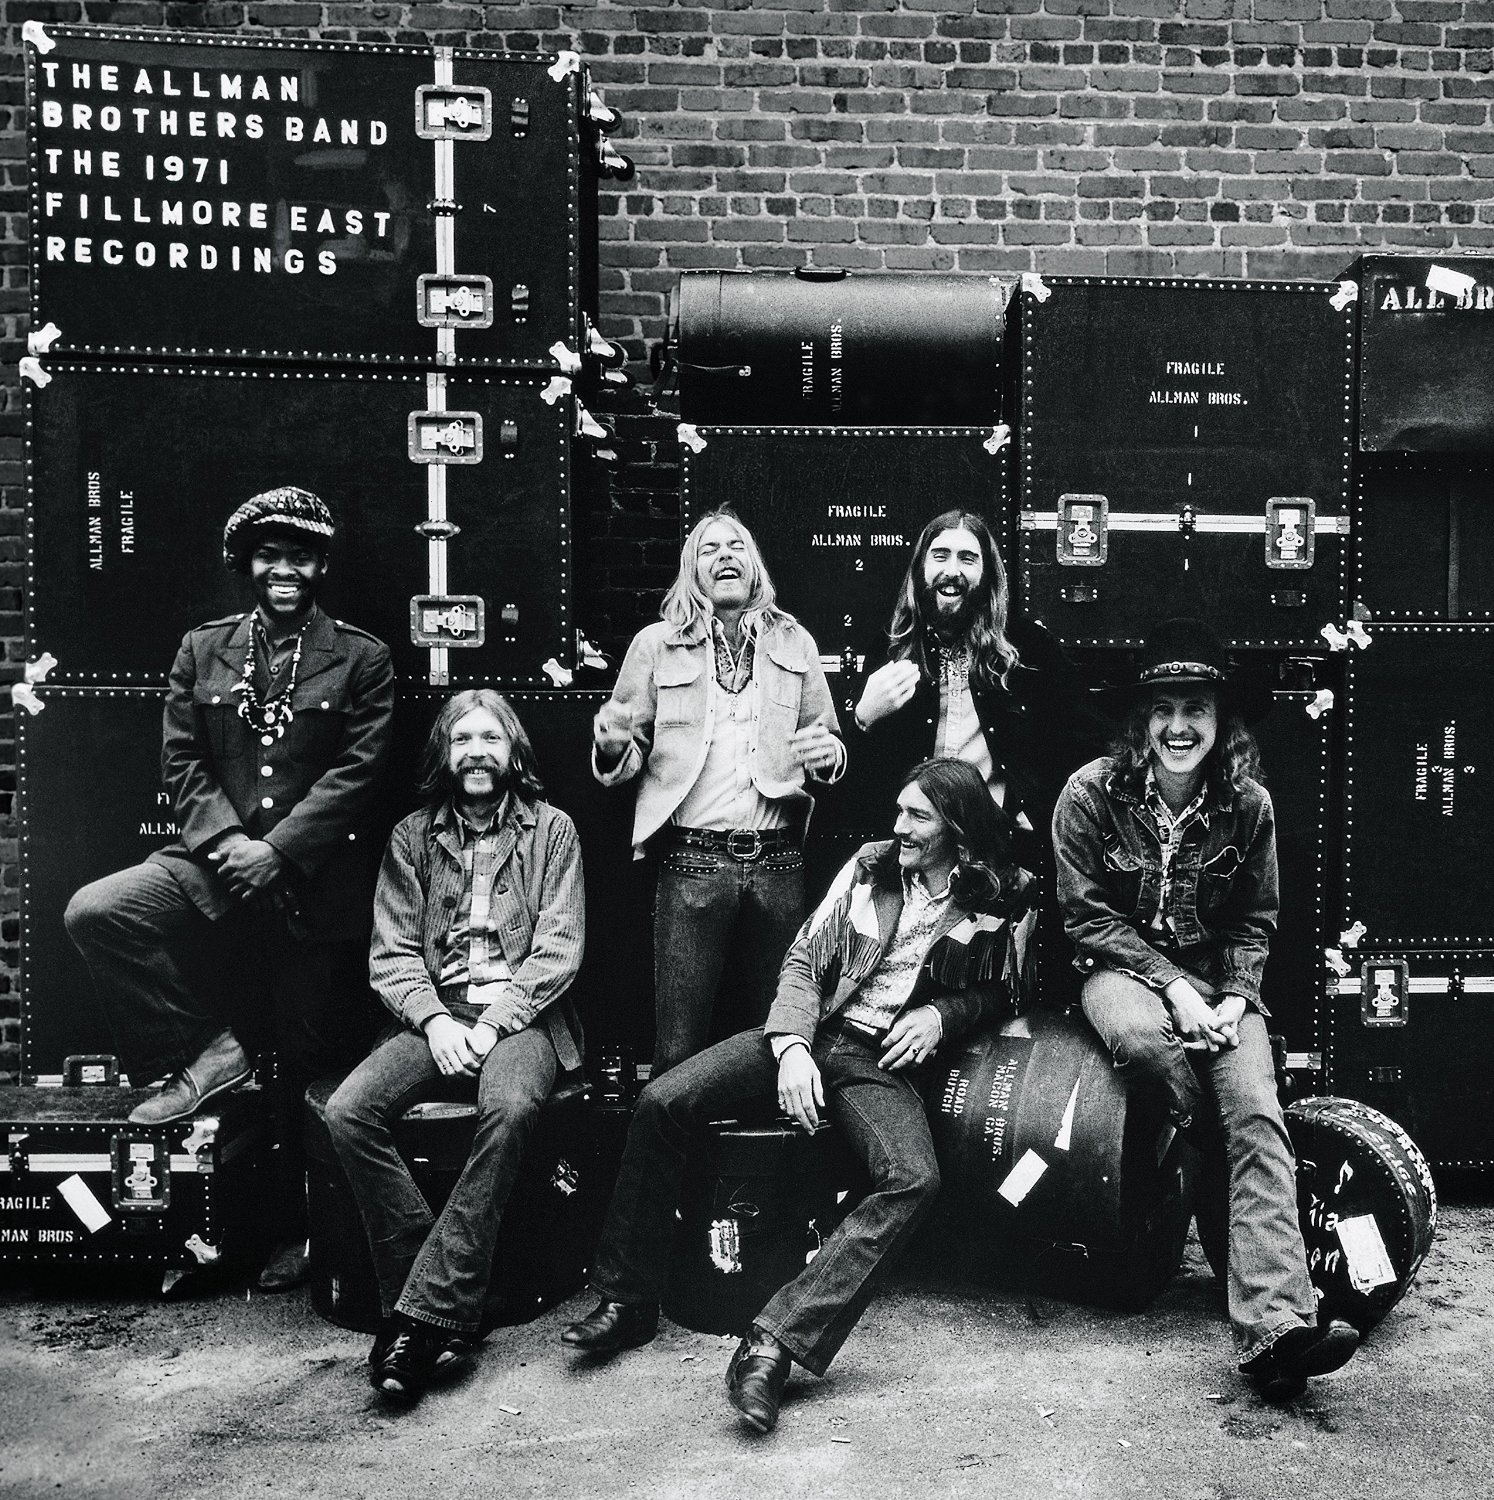 The Allman Brothers Fillmore East 1971